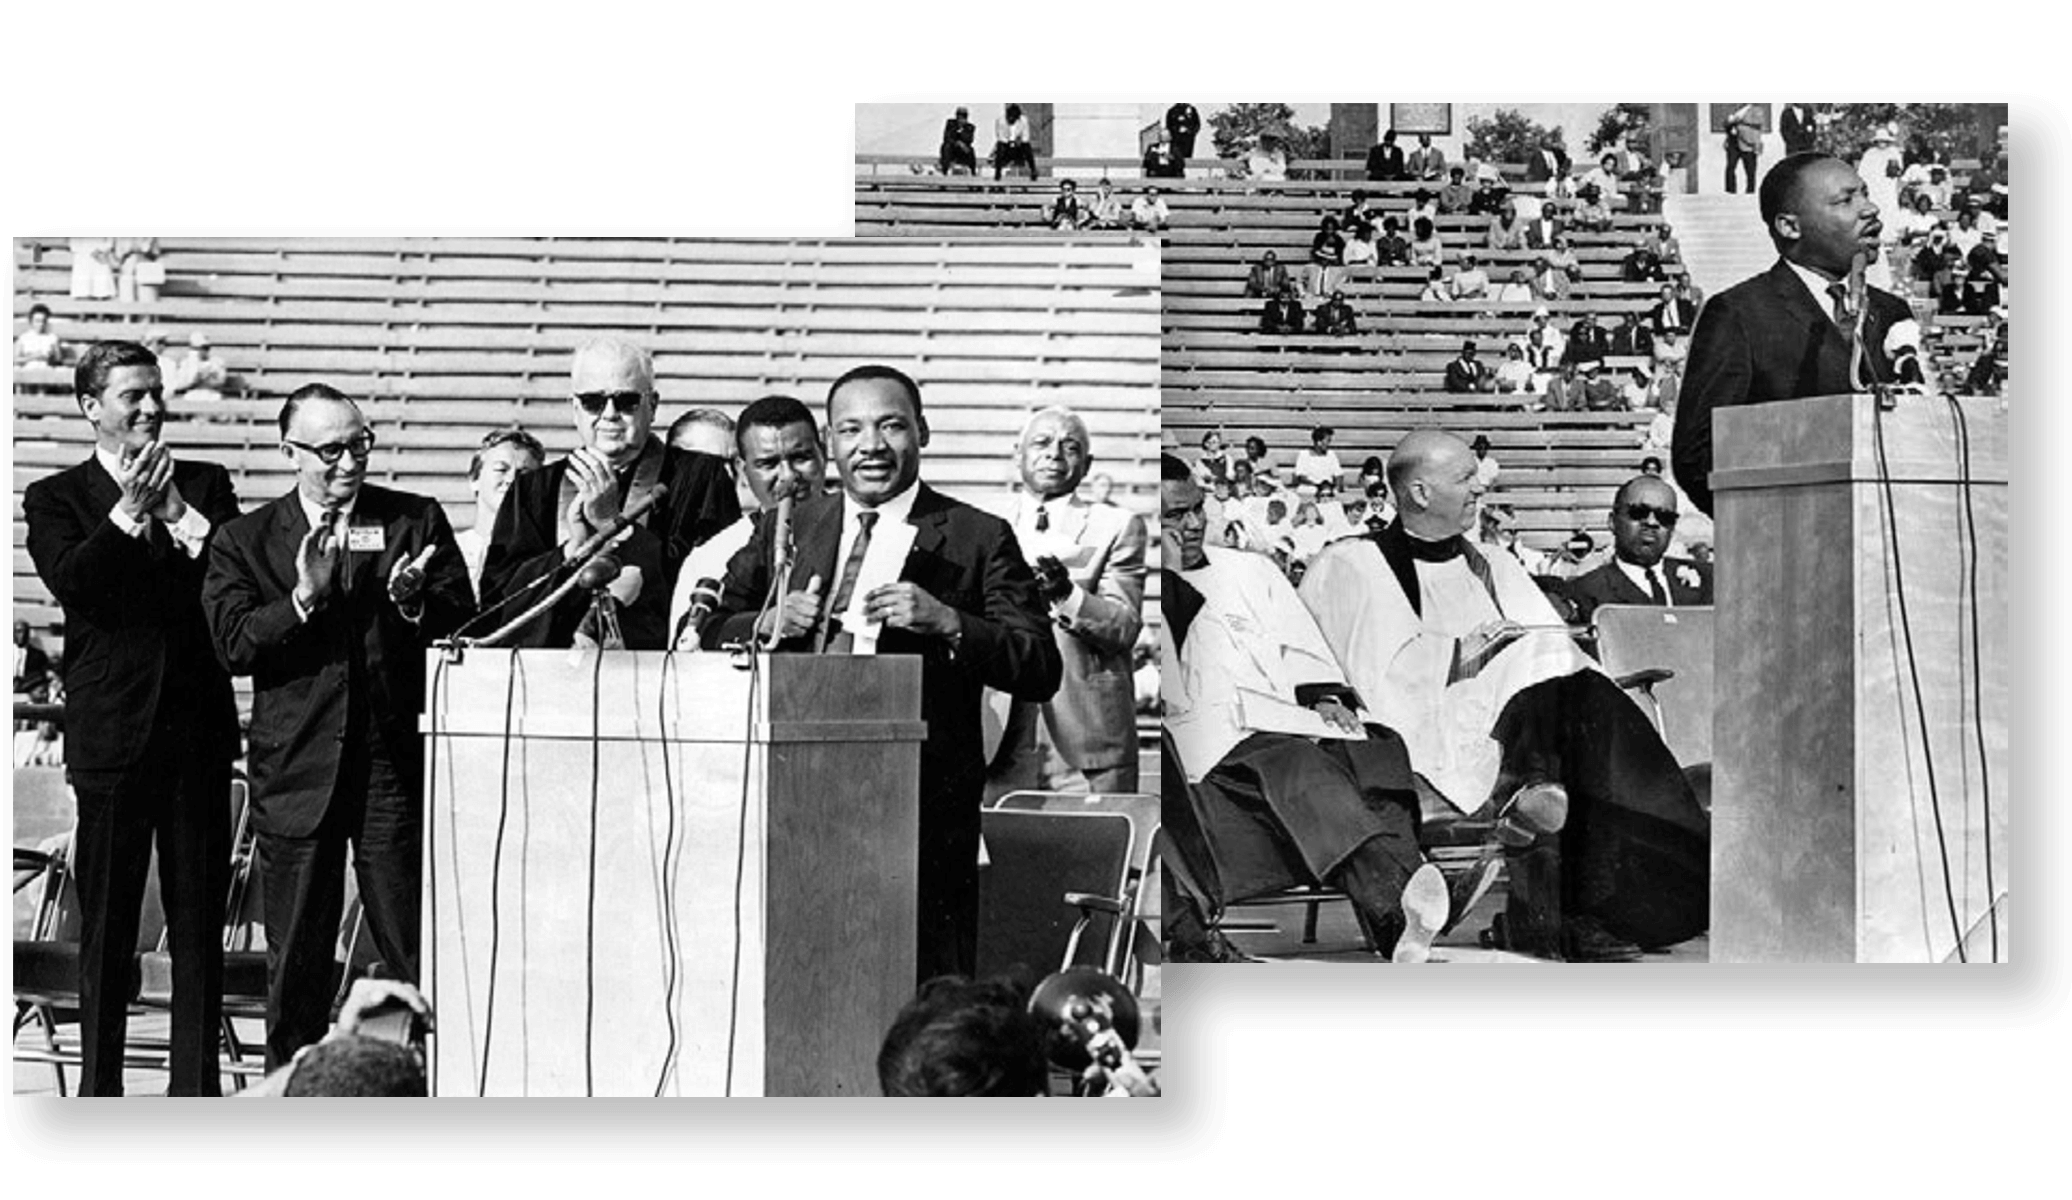 Martin Luther King Jr. Speaks at Human Dignity Event